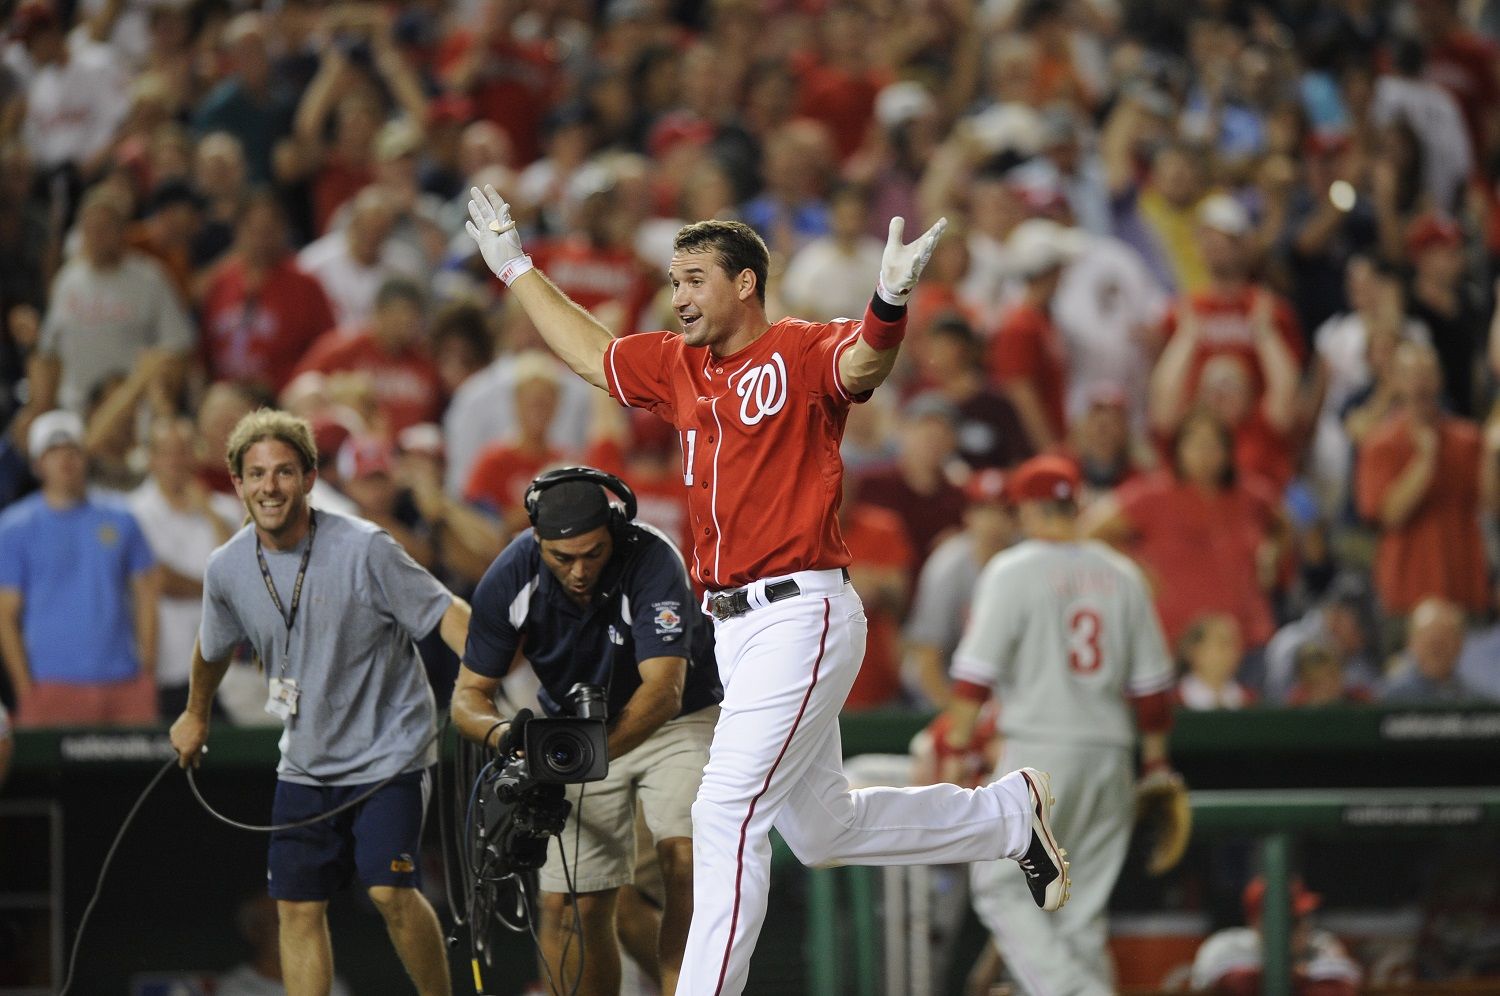 Ryan Zimmerman to be honored by Nationals